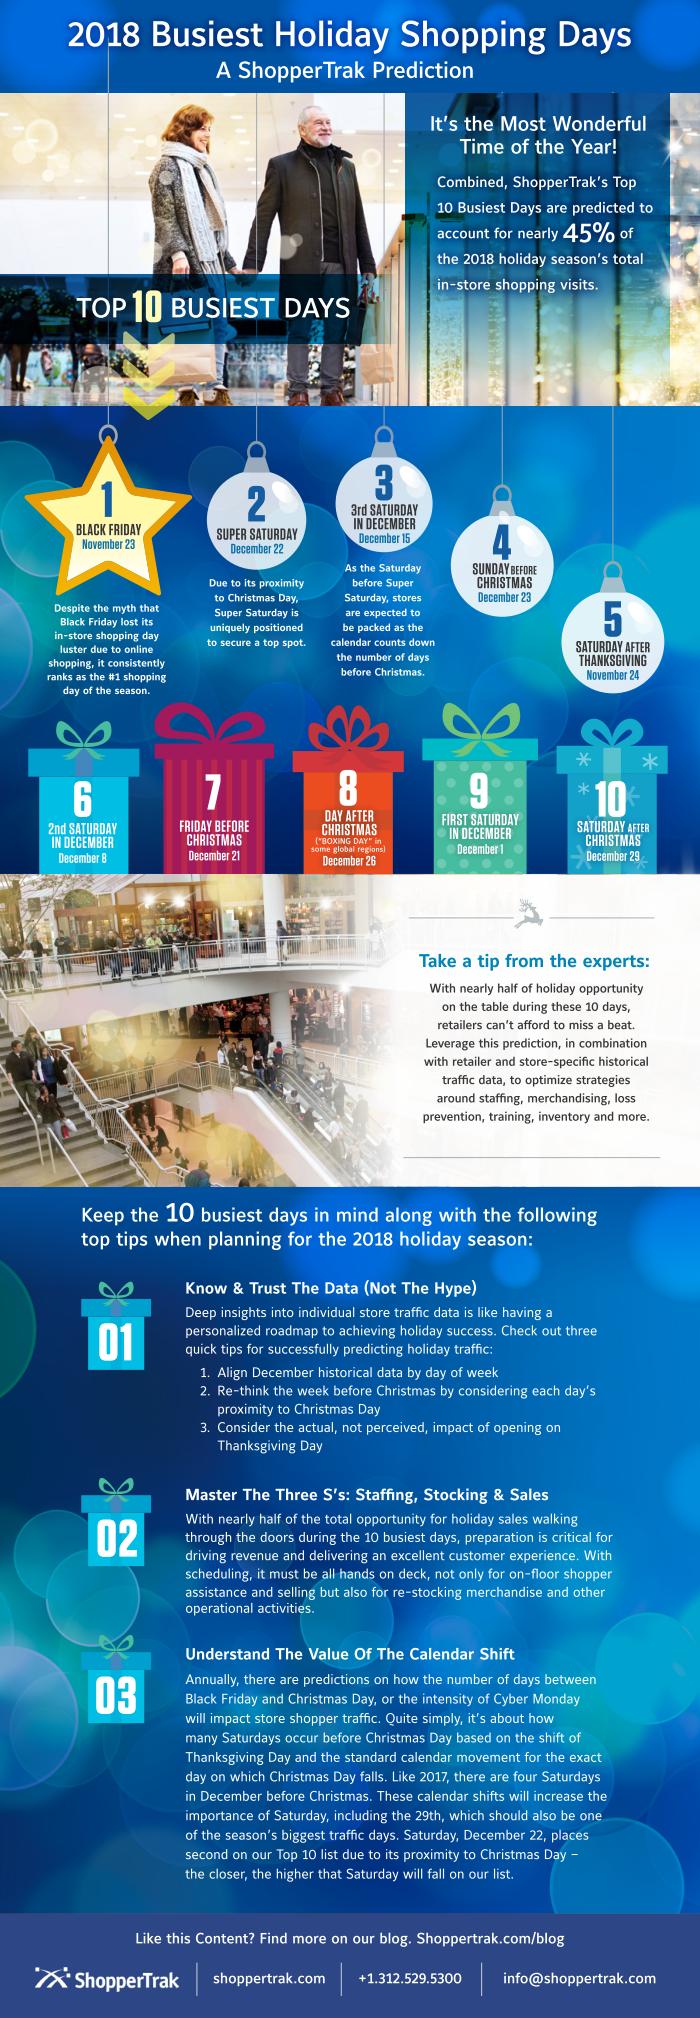 2018 Busiest Days Infographic